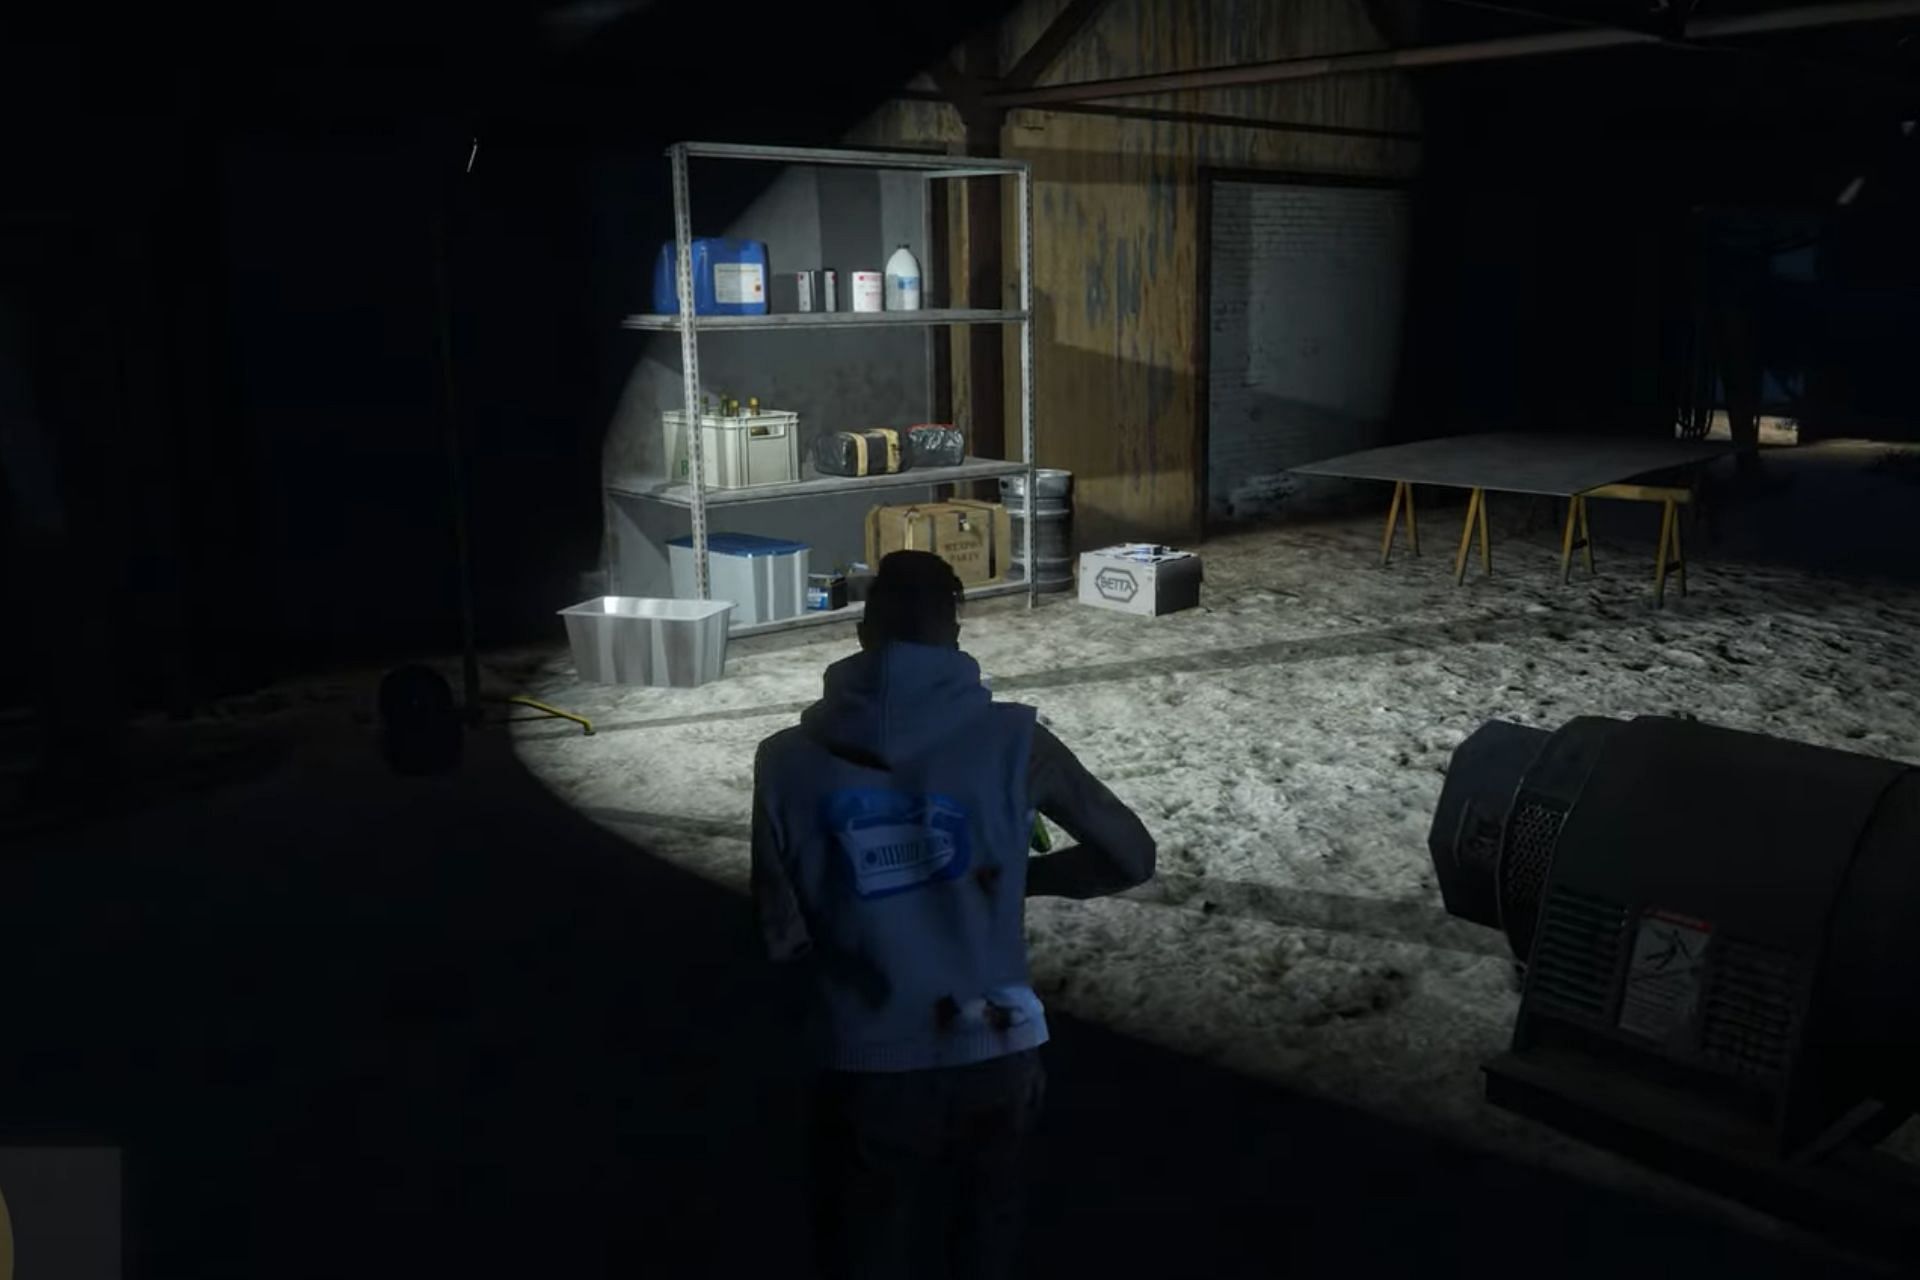 Potential location for a meth package spawning in the Fatal Incursion mission (Image via YouTube)